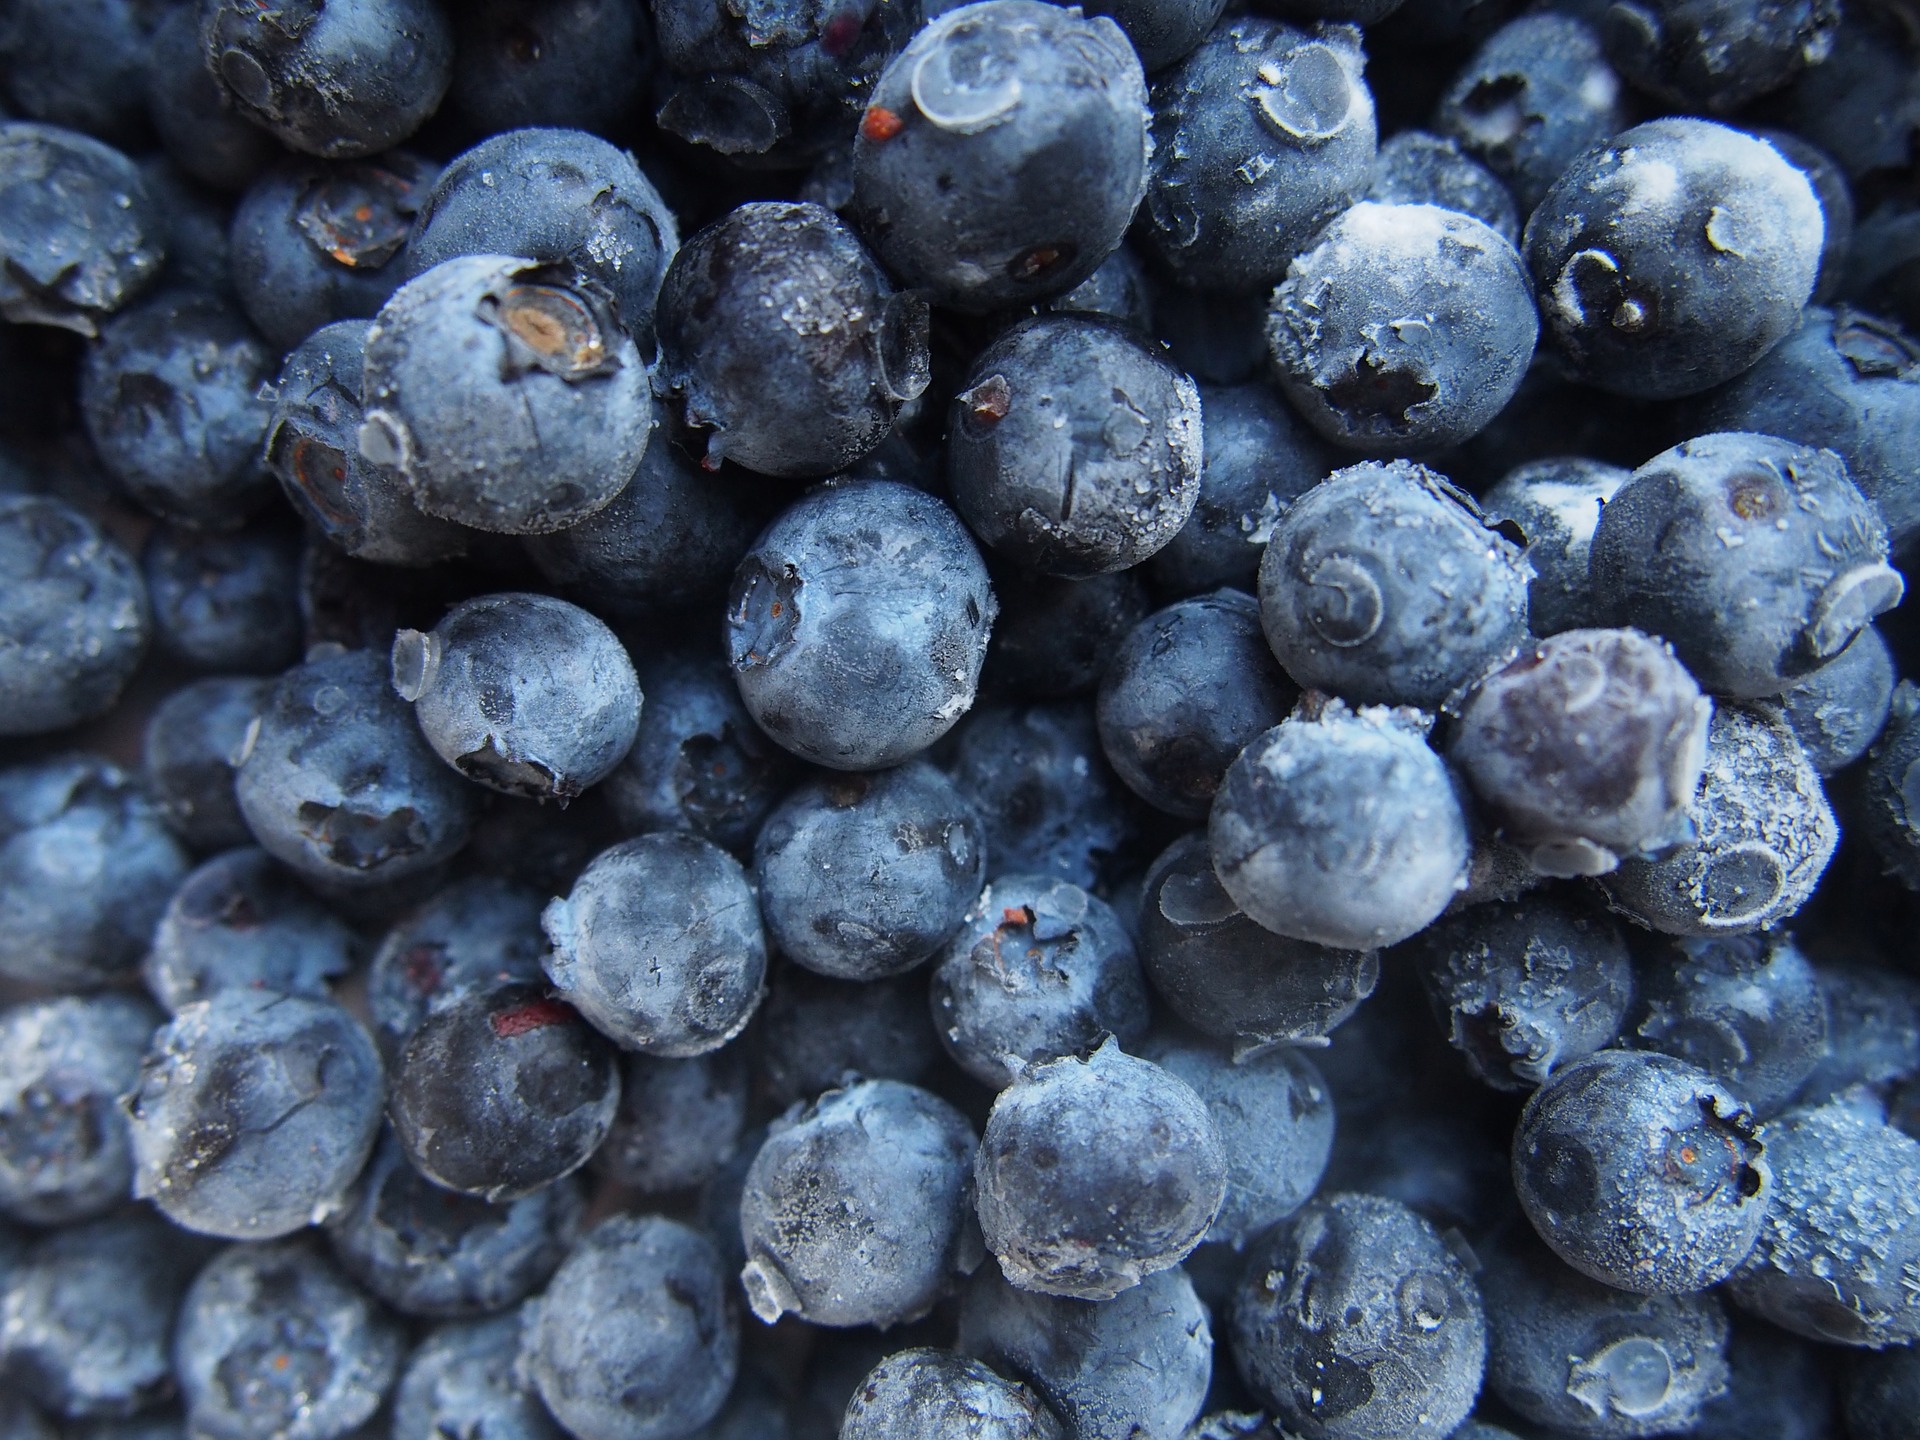 How to Freeze Blueberries: Guide to Freezing Blueberries | The Old ...